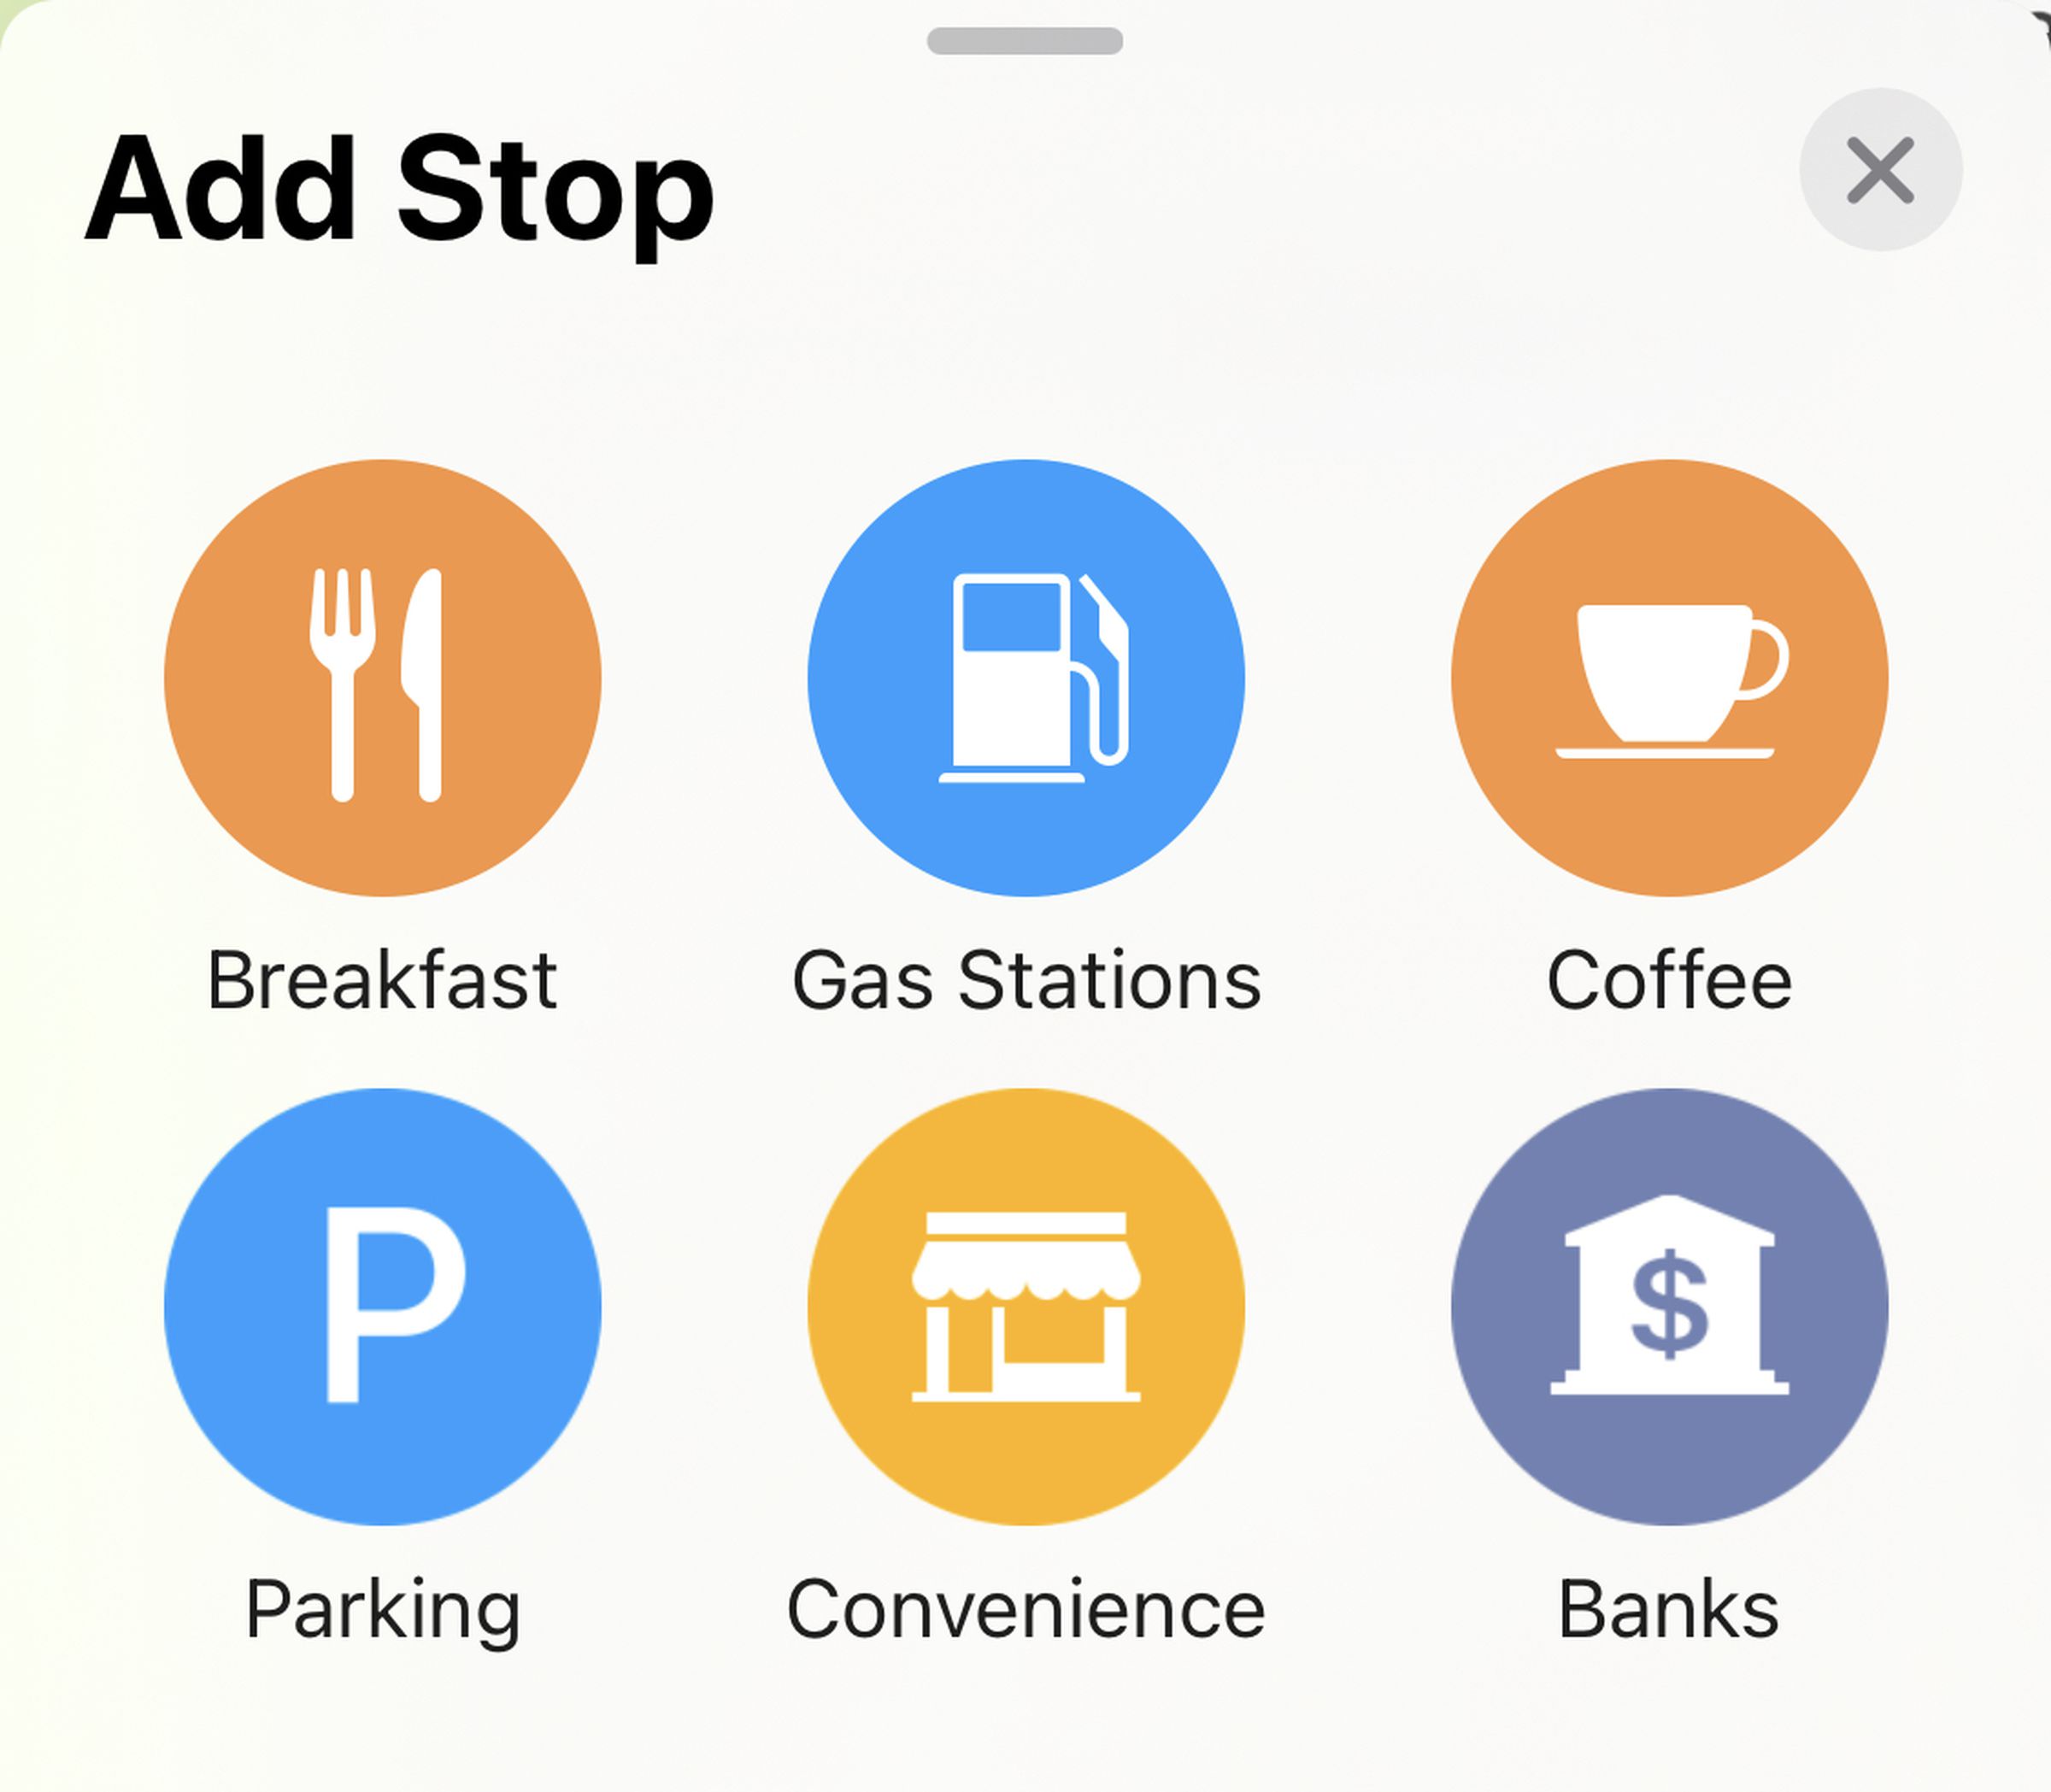 Tapping on Restaurants (currently labeled “Breakfast” because it’s morning) will give you a list of 10 places that are nearby.